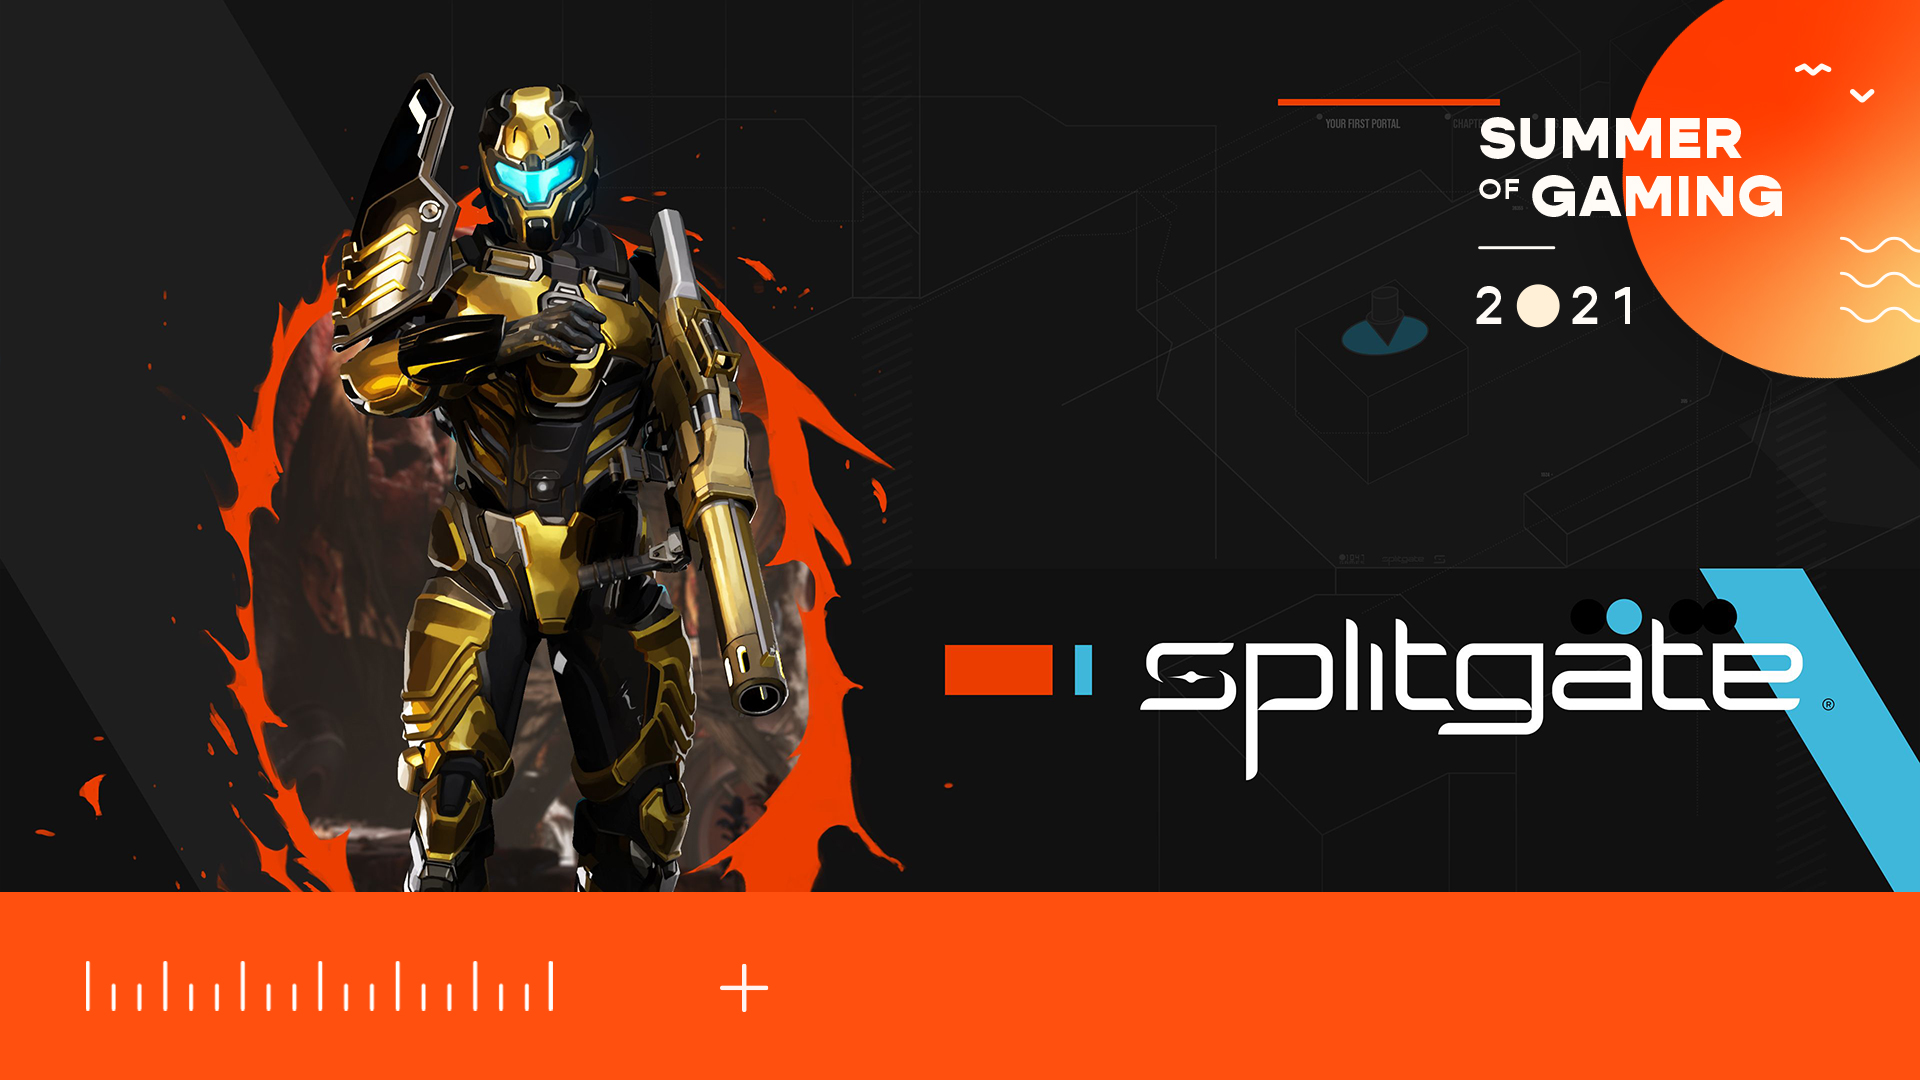 Splitgate in tomorrow to the Expo Summer of Gaming 2021 stream. We are excited to take Splitgate to the next level very soon! The show starts